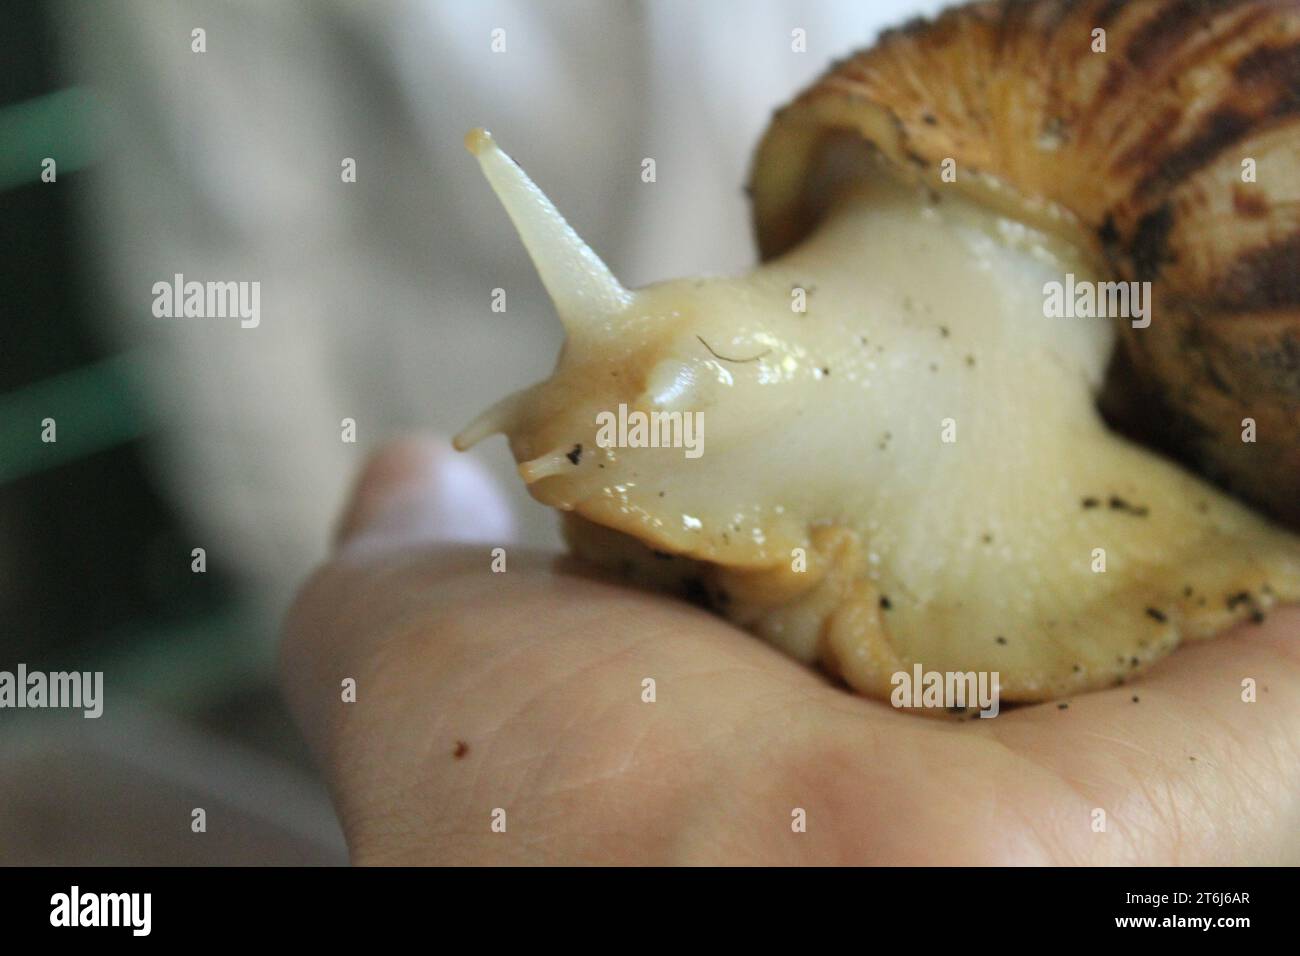 A large Achatina snail is sitting on an arm close-up. Snail Farming: An Alternative Source of Protein. Stock Photo